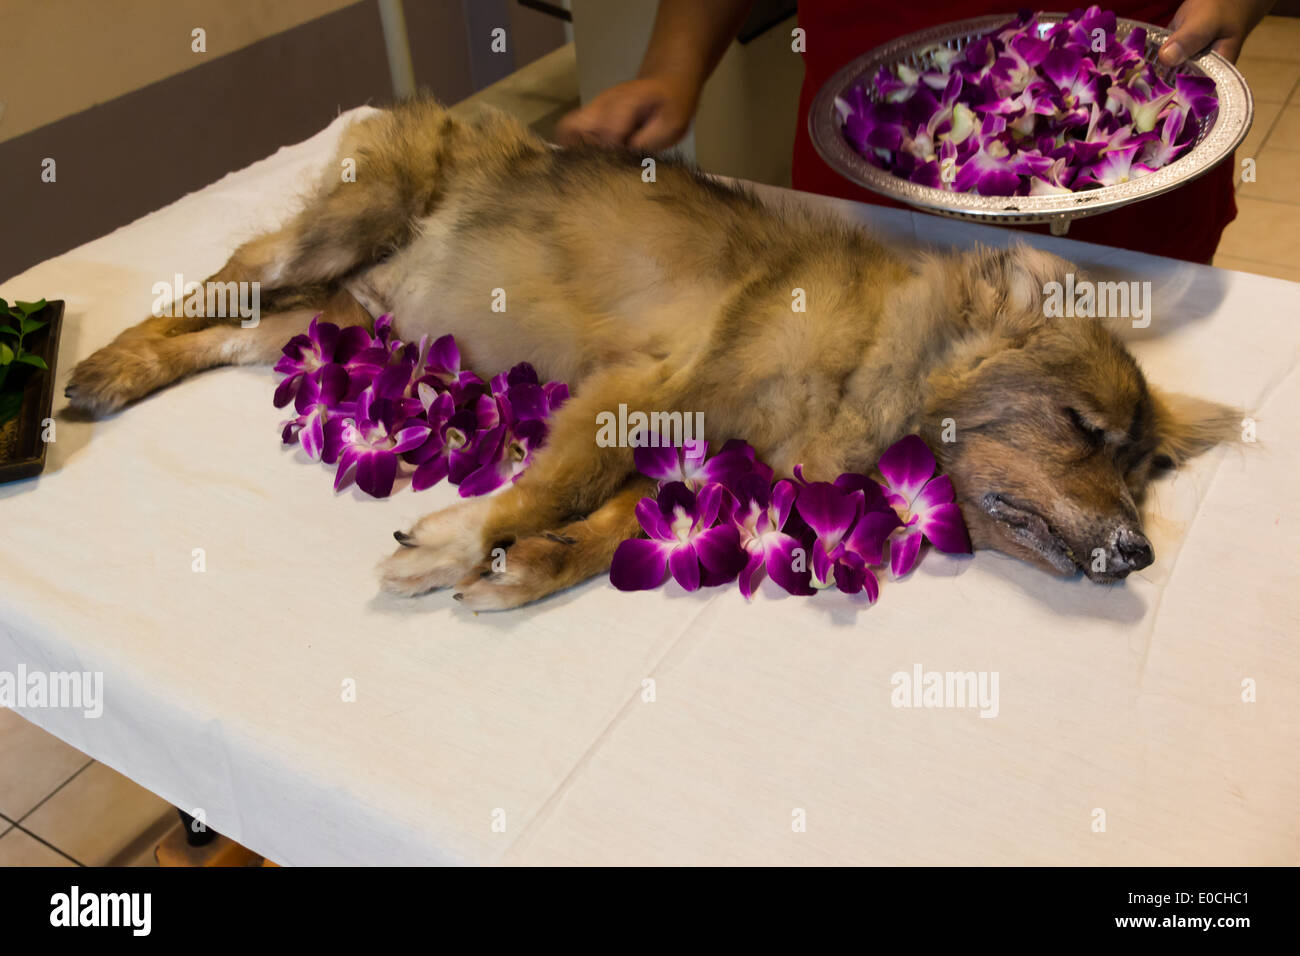 Dog funeral ceremony;Rest in peace. Stock Photo